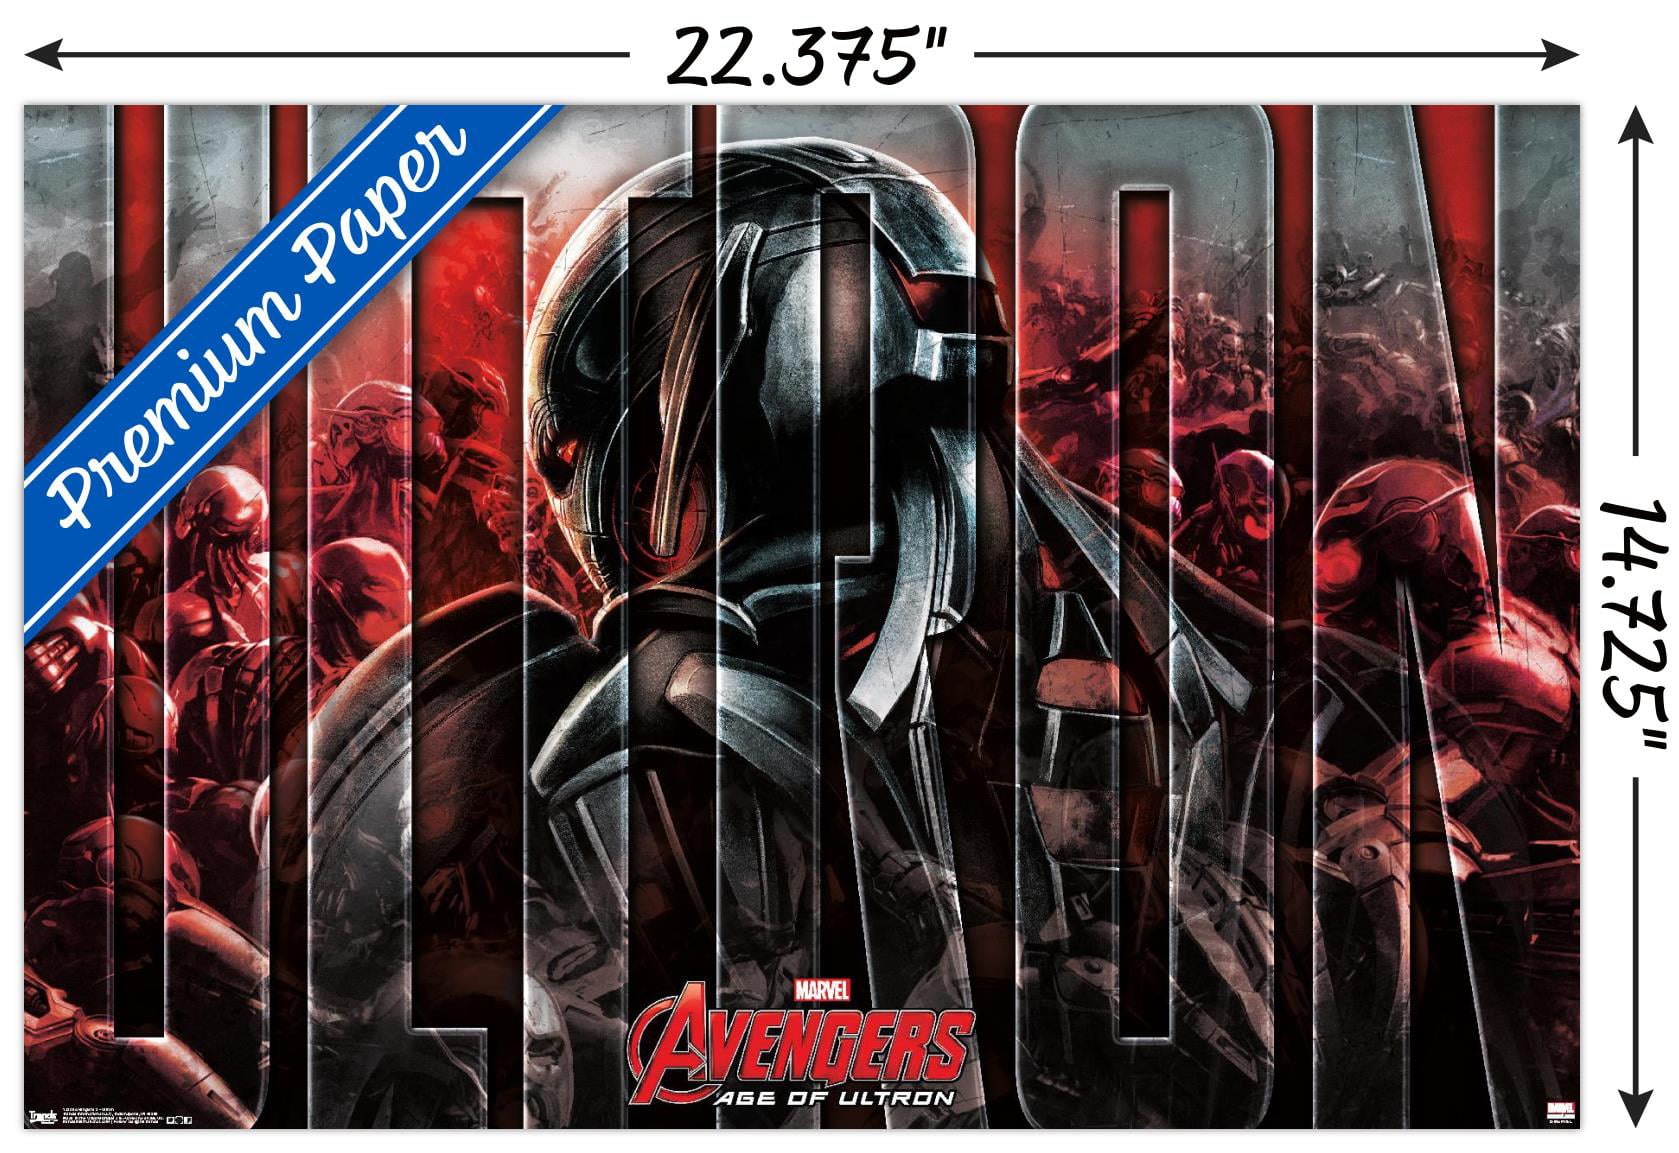 CHOOSE YOUR SIZE! Marvel Avengers Poster Age of Ultron Quality Large FREE P+P